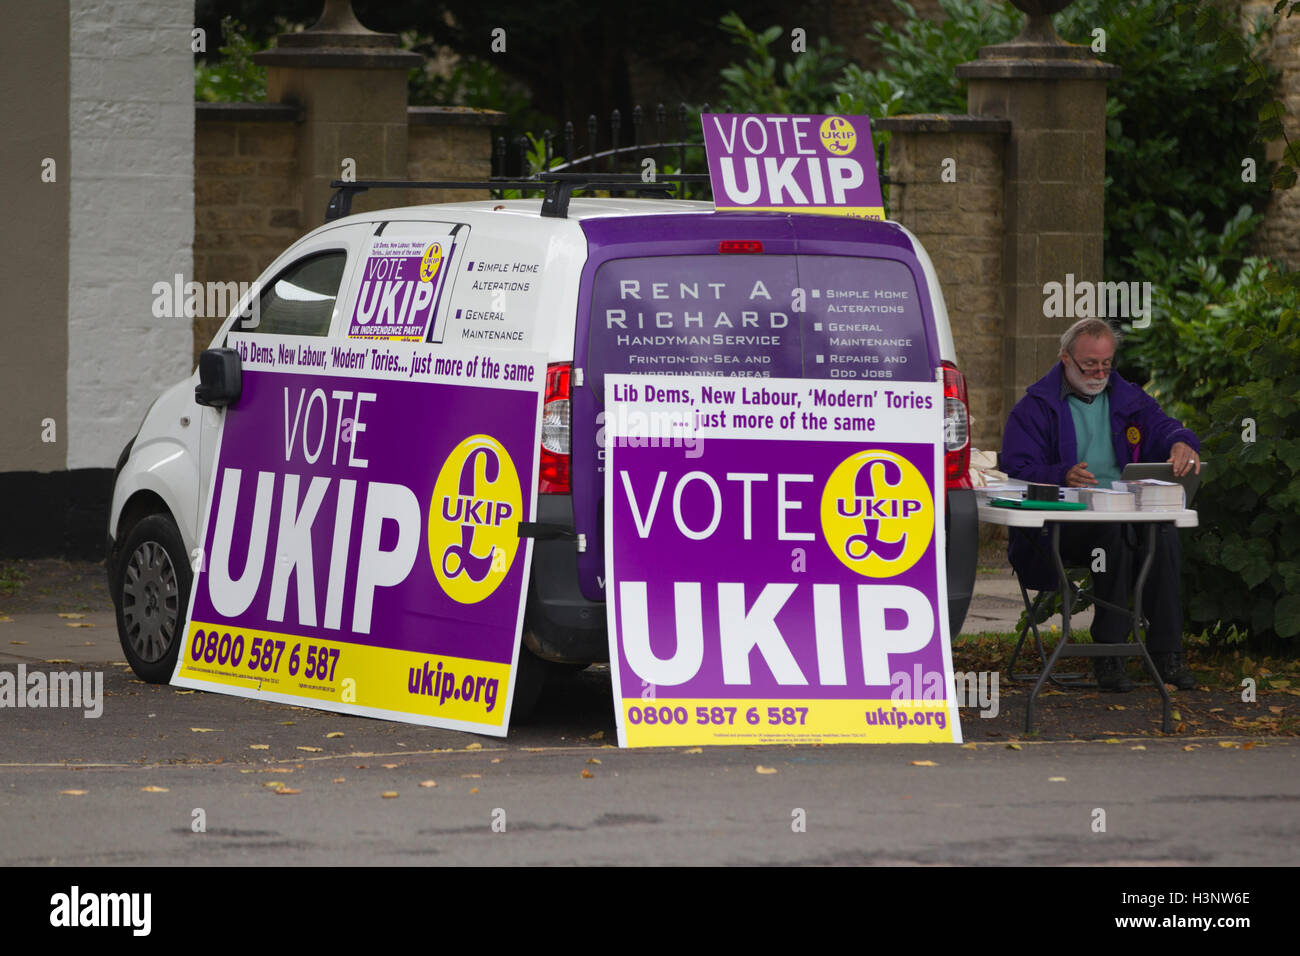 UKIP, United Kingdom Independence Party campaigning for David Cameron's vacant Witney constituency seat, West Oxfordshire, UK Stock Photo